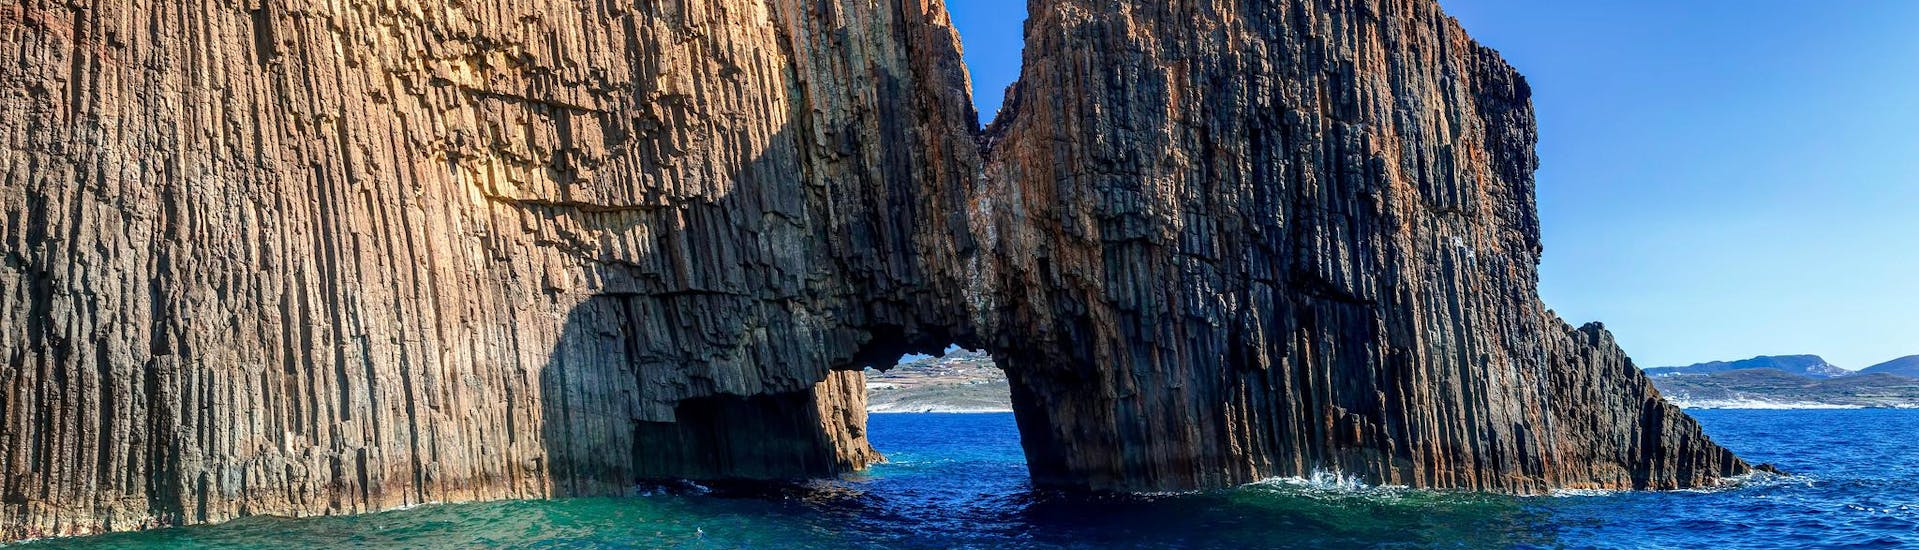 Unbelievable rocky volcanic Glaronissia islets with a beautiful arch, that you can see with a boat trip in Milos island.